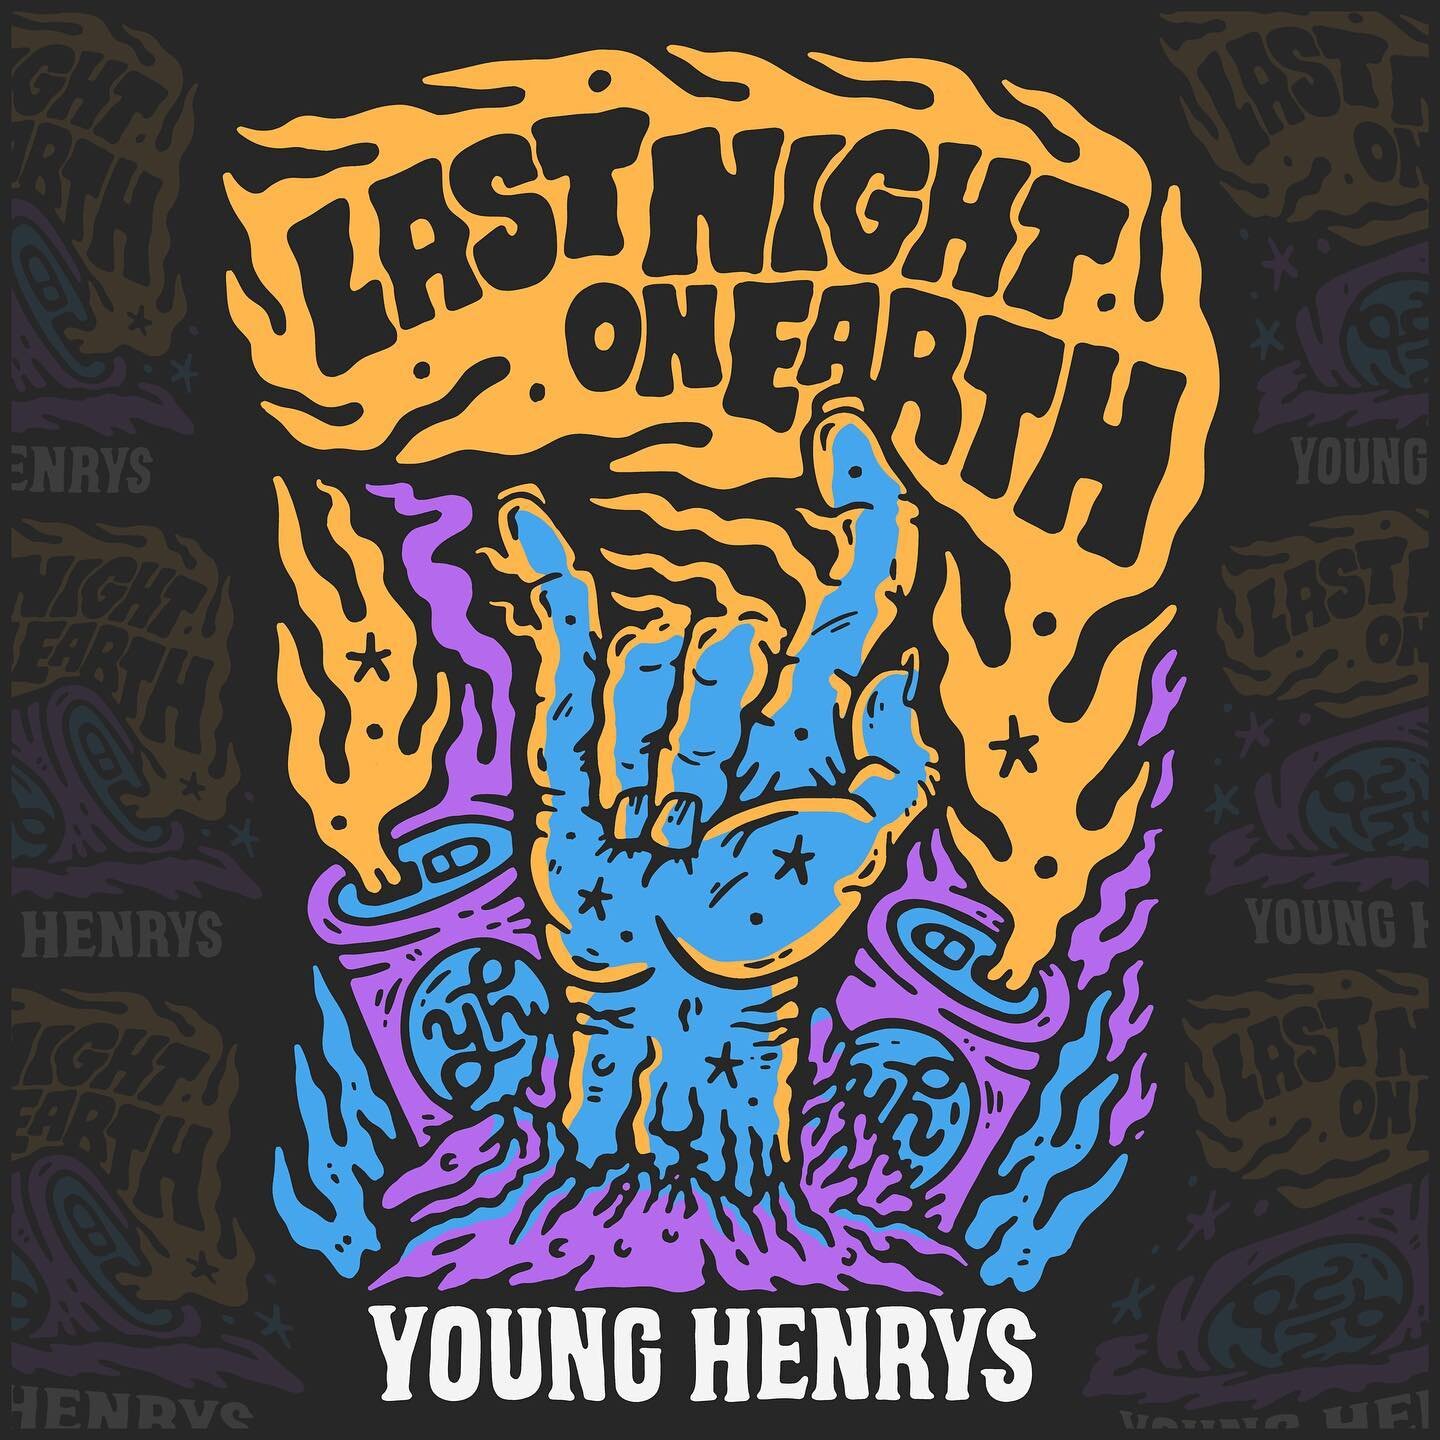 New shirt artwork froooom beyooooob the grraaaaaave for Southport&rsquo;s @lastnighton_earth bar. A fresh collab with @younghenrys, get in there for some good beers and gooder times!
I painted a big mural upstairs there back in 2018, I can only imagi